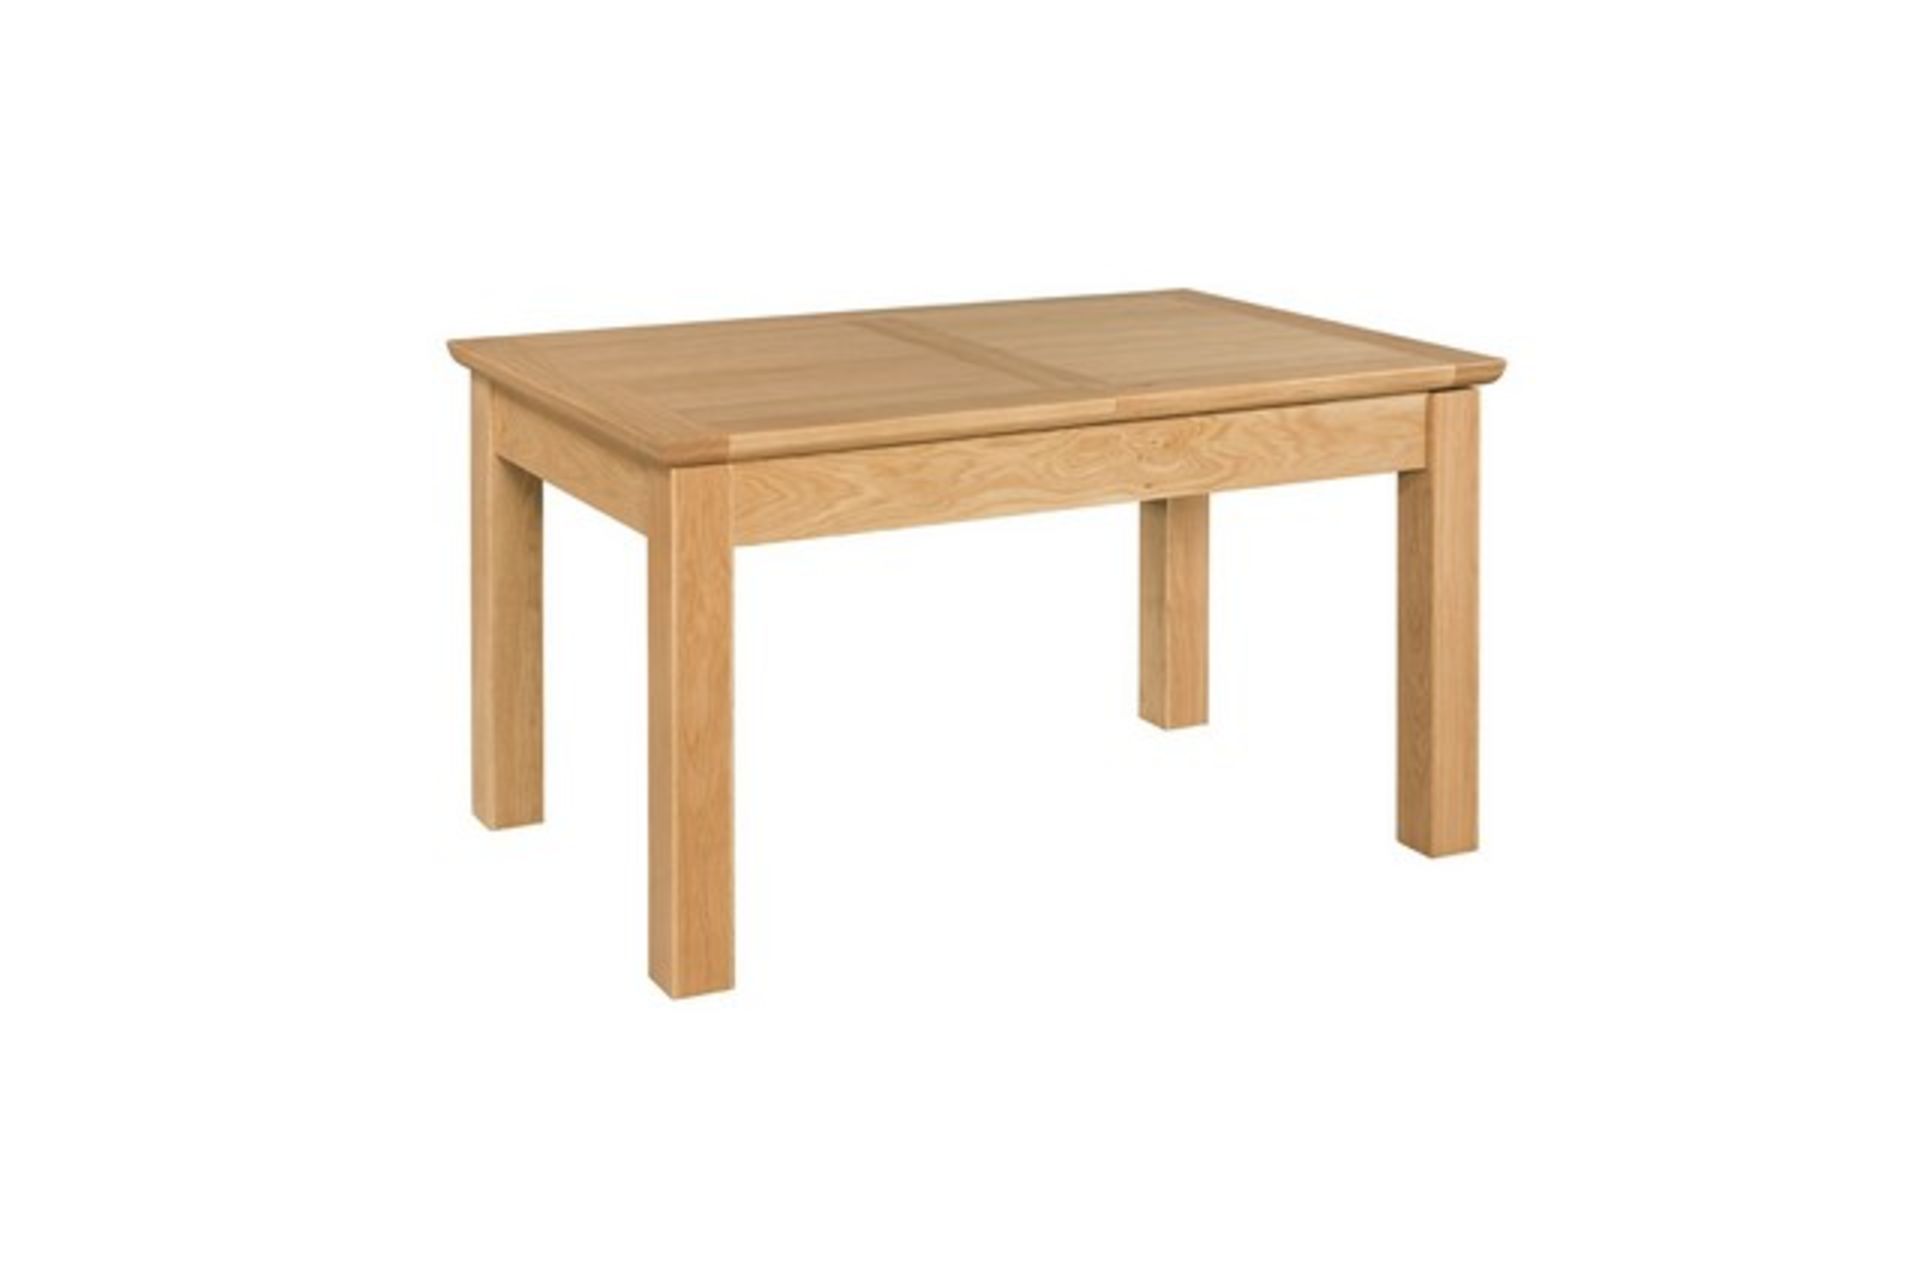 V Brand New Siena 140x90 Butterfly Extension Table (extends to 200cm) RRP519 (Devonshirepineandoak.